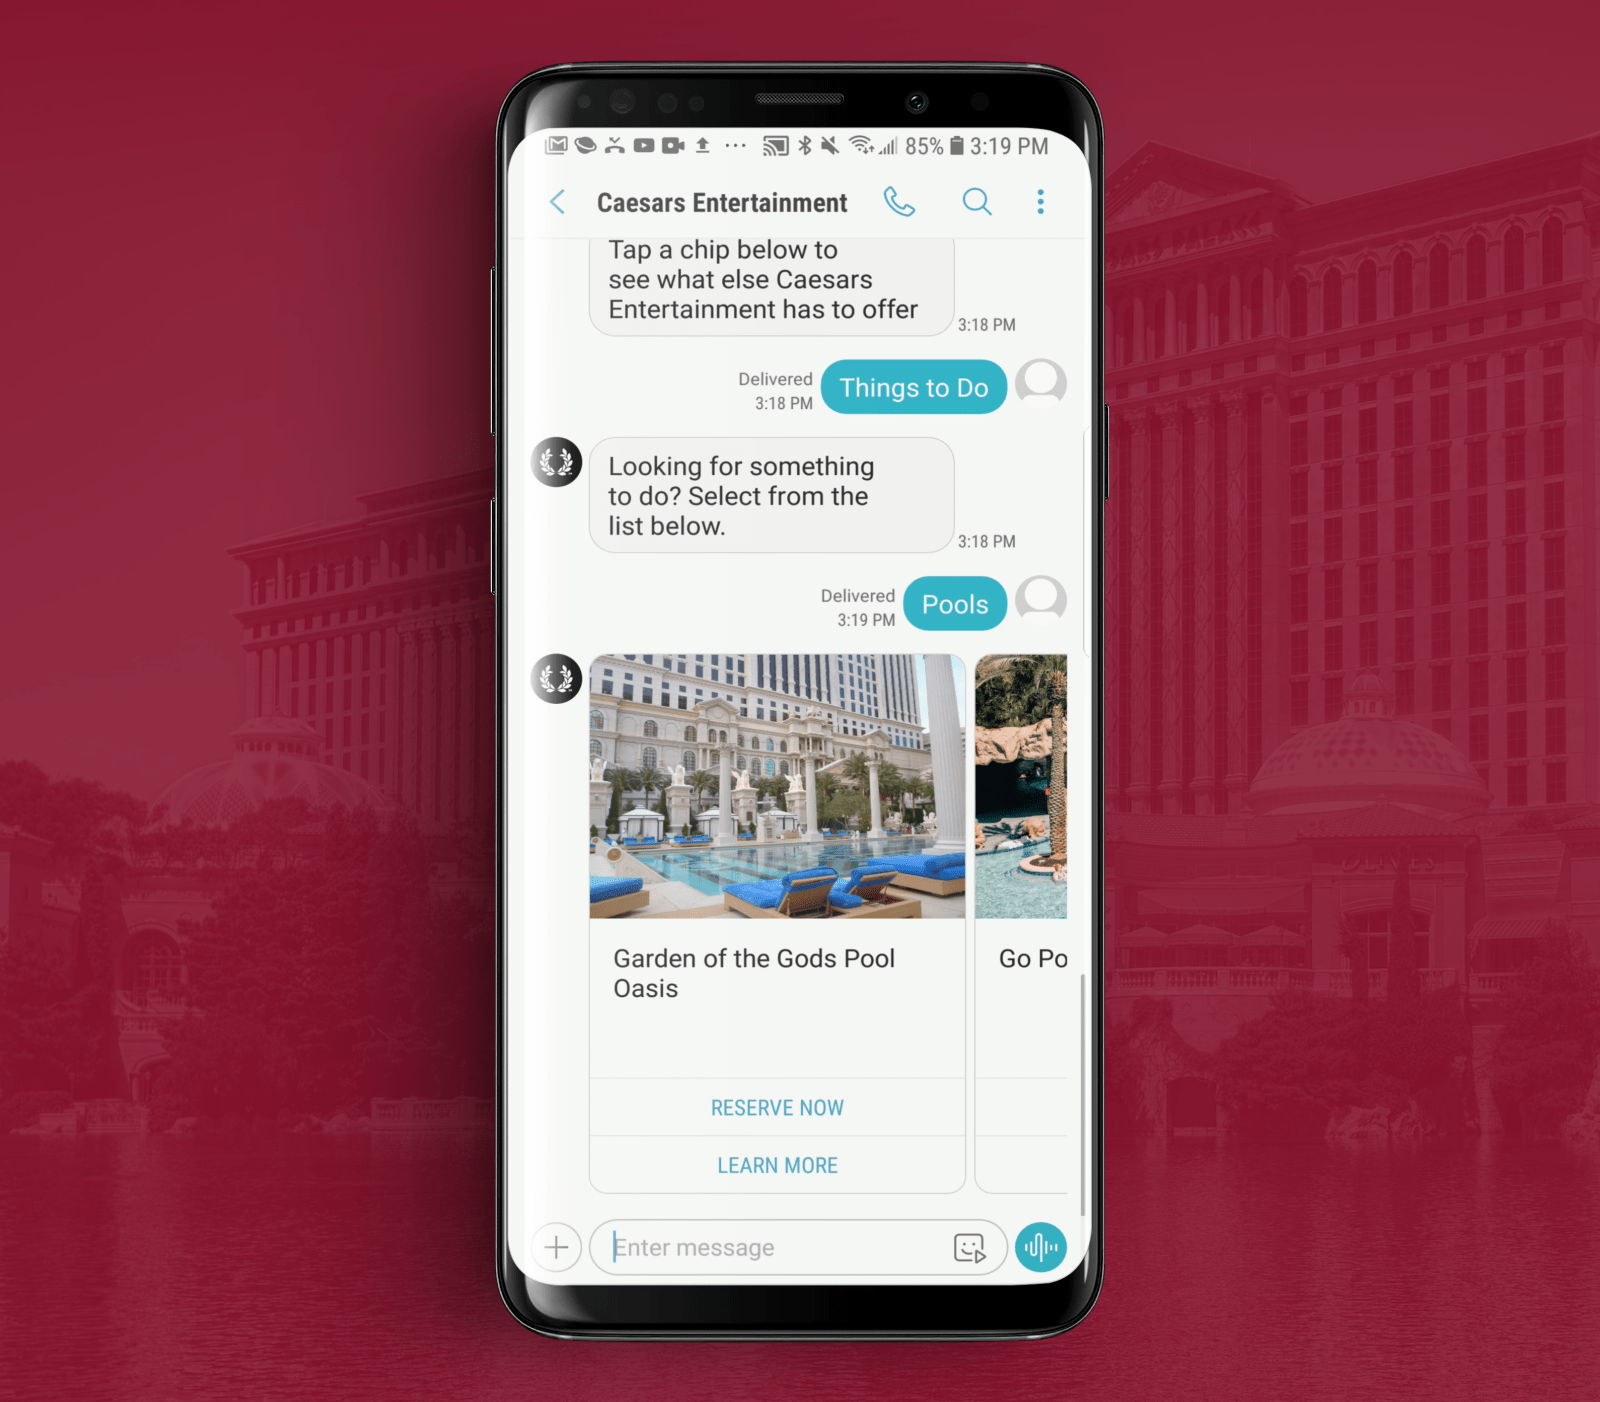 RCS Business Messaging Example from Caesars Entertainment 3